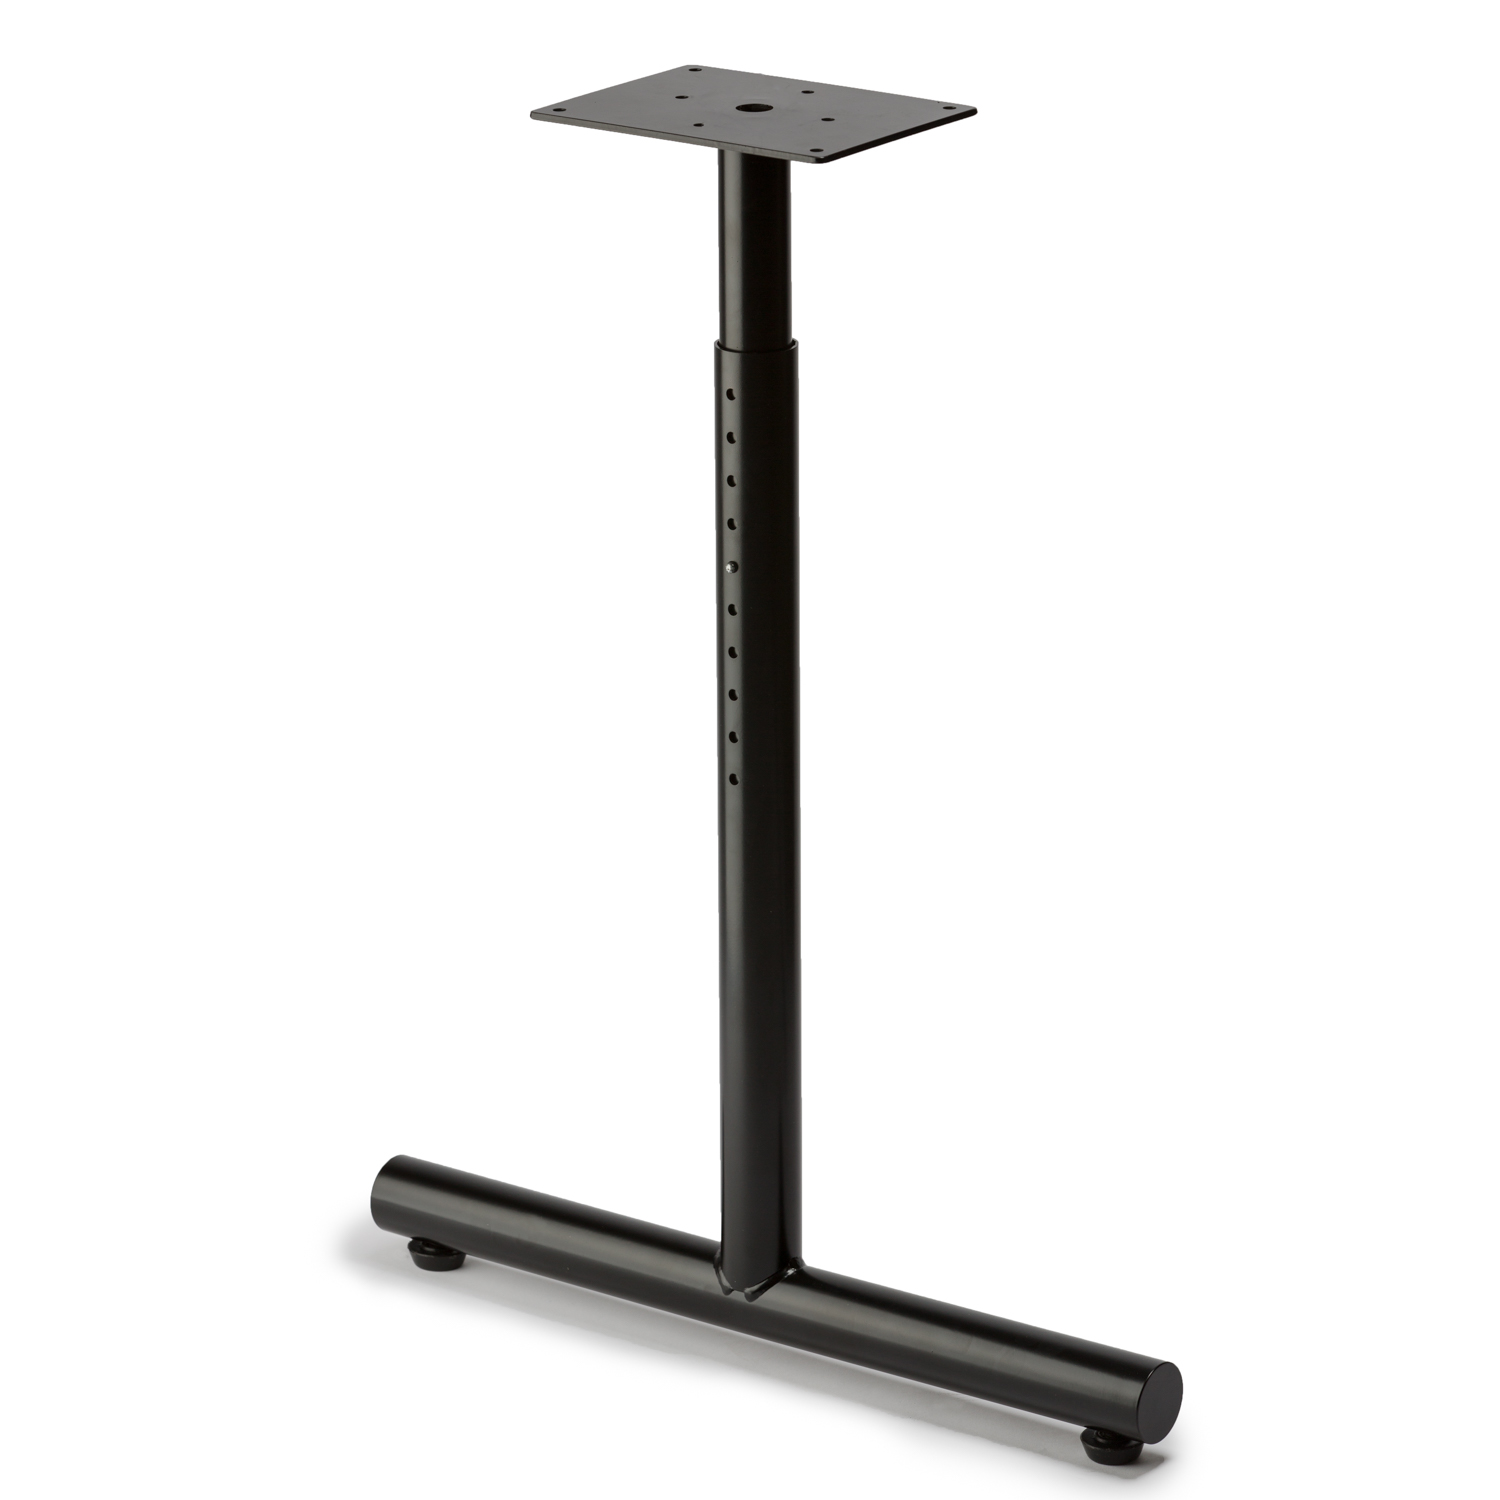 AS22T Adjustable Height - Black Table Base - DISCONTINUED